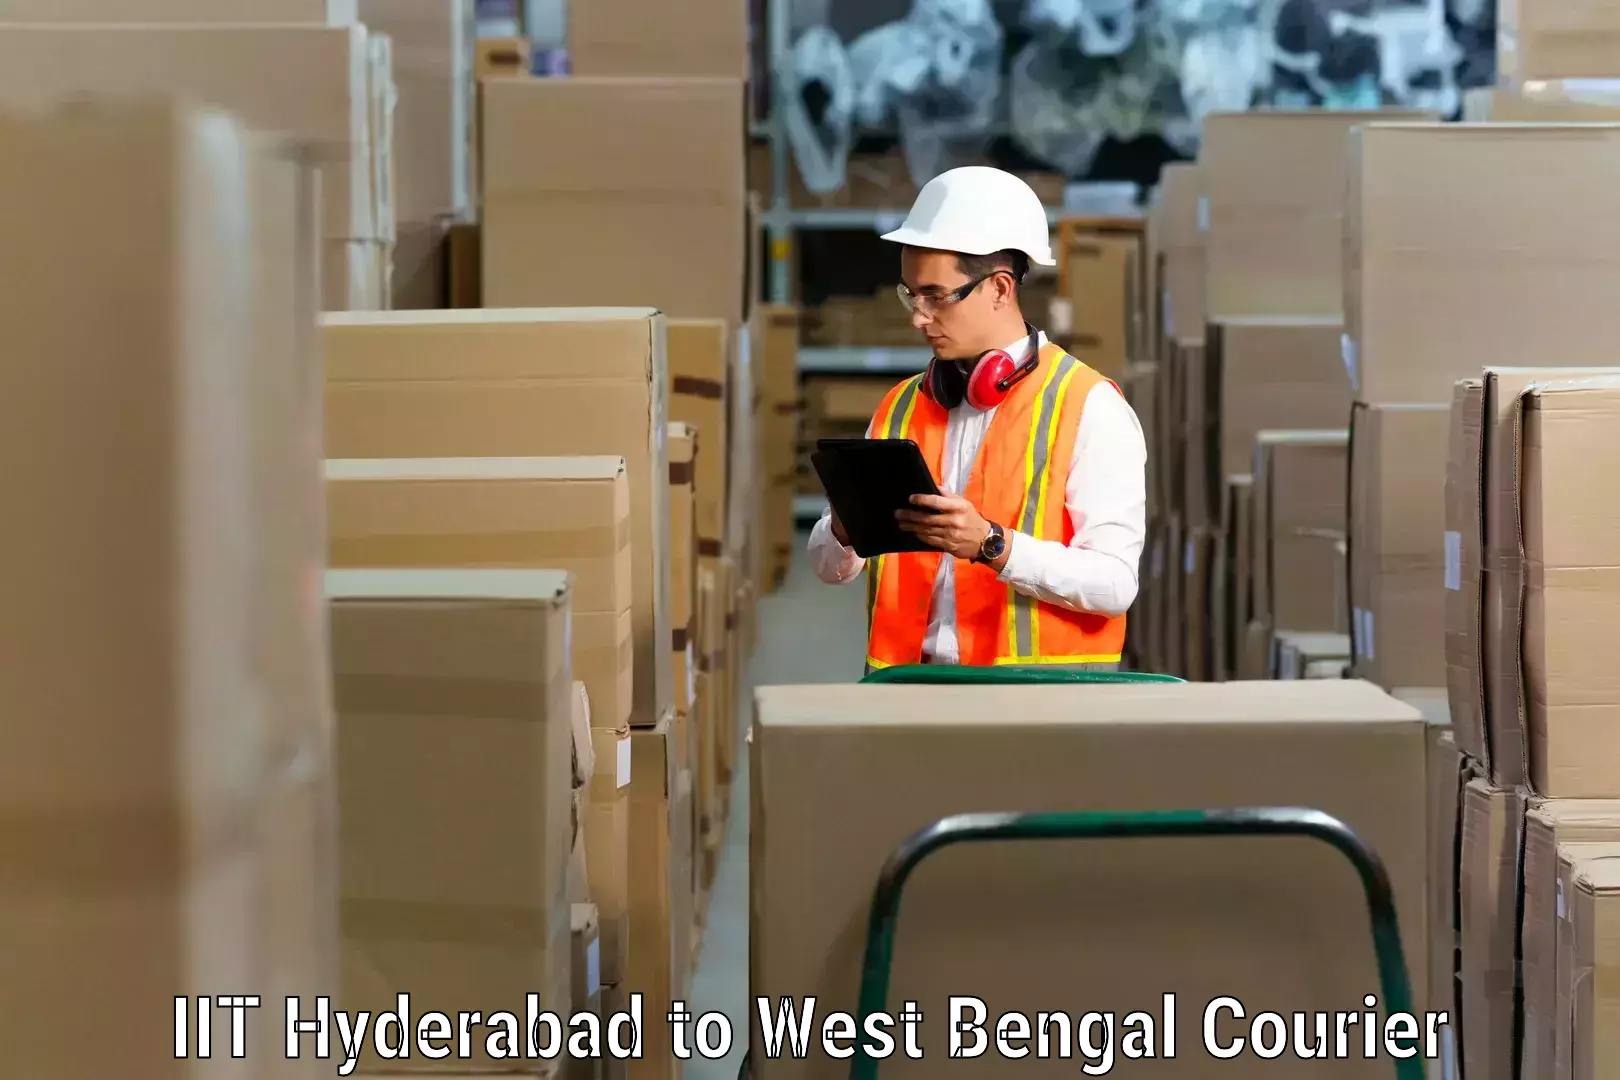 Professional packing and transport IIT Hyderabad to West Bengal